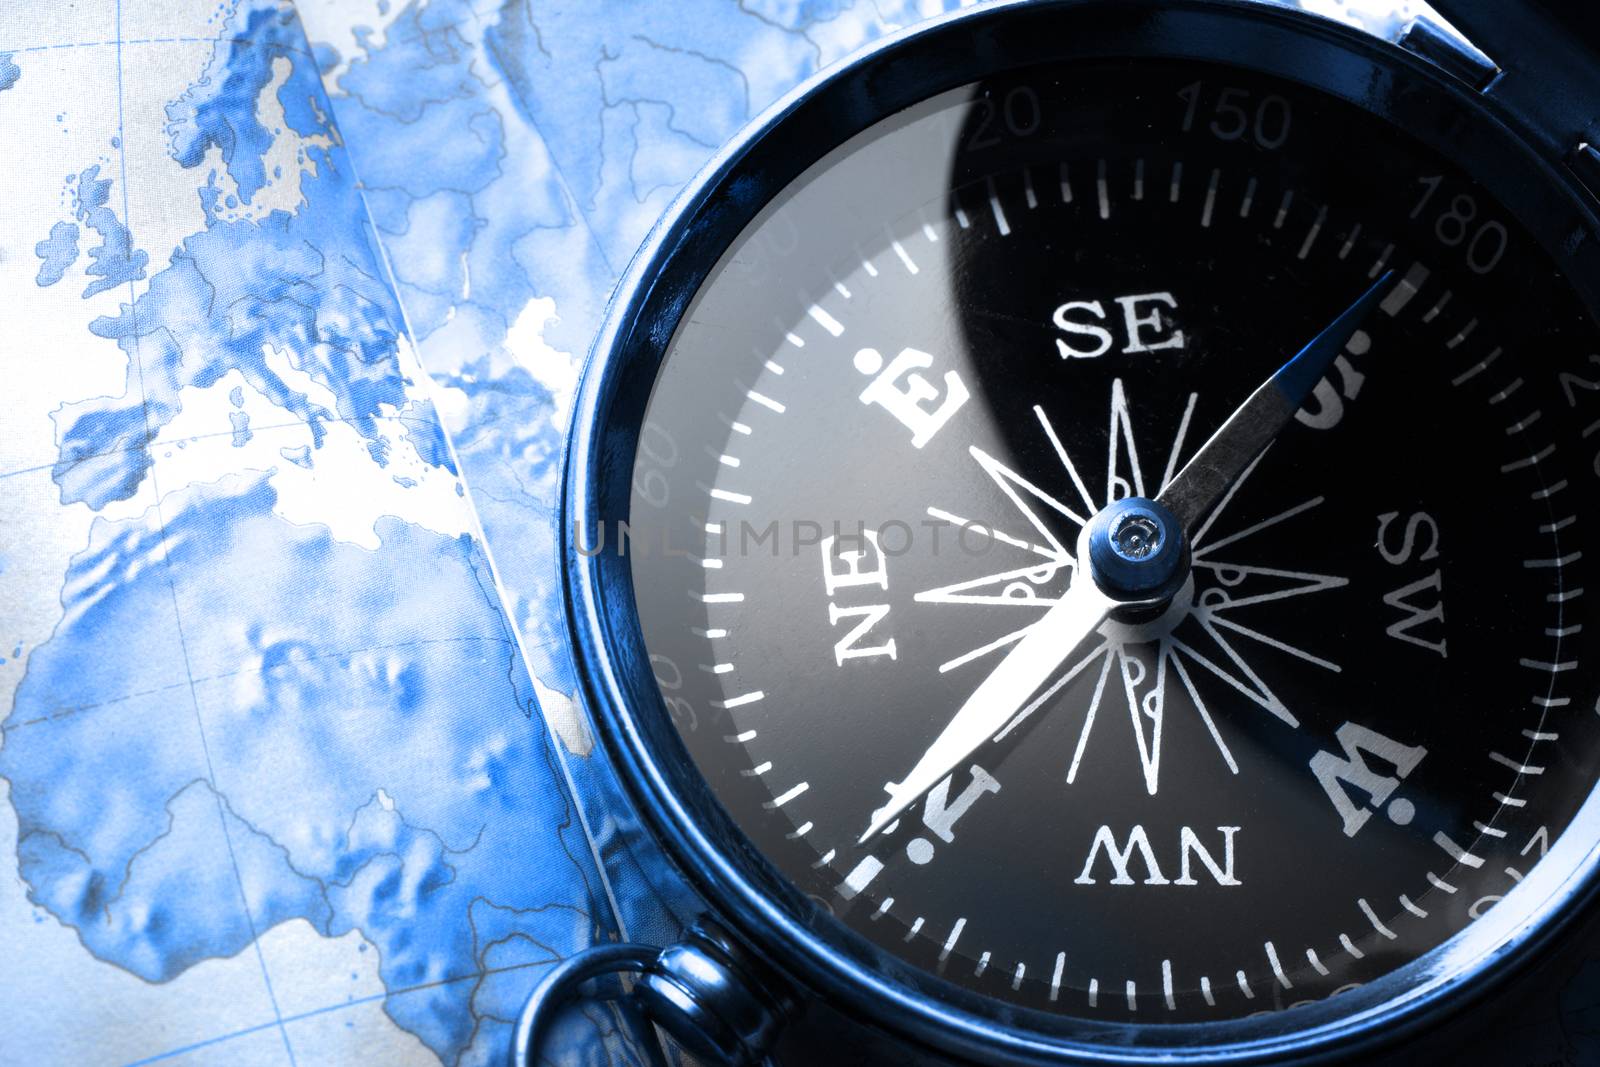 Compass on map background in blue toning